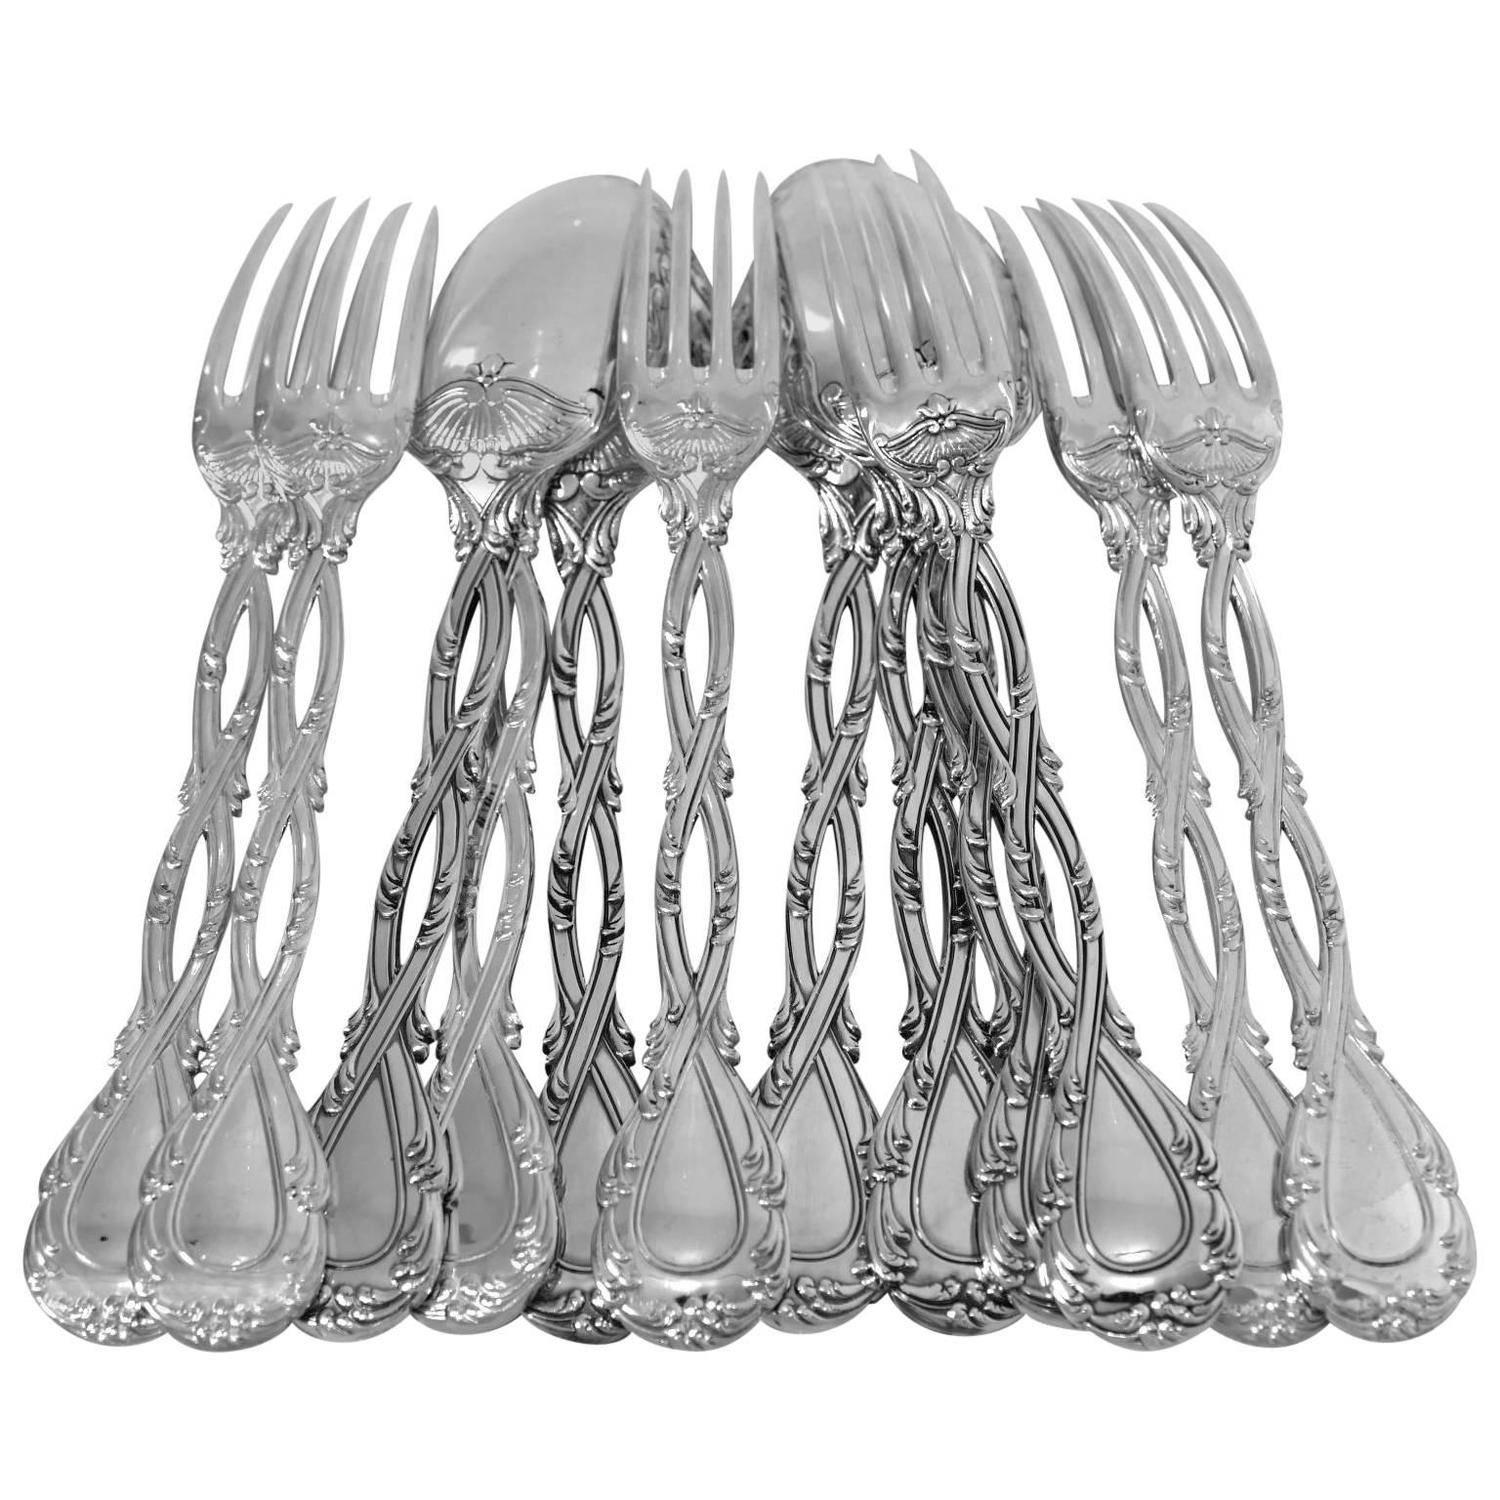 Odiot Tetard French Sterling Silver Dessert Entremet Set 12 Pc Trianon Pattern For Sale